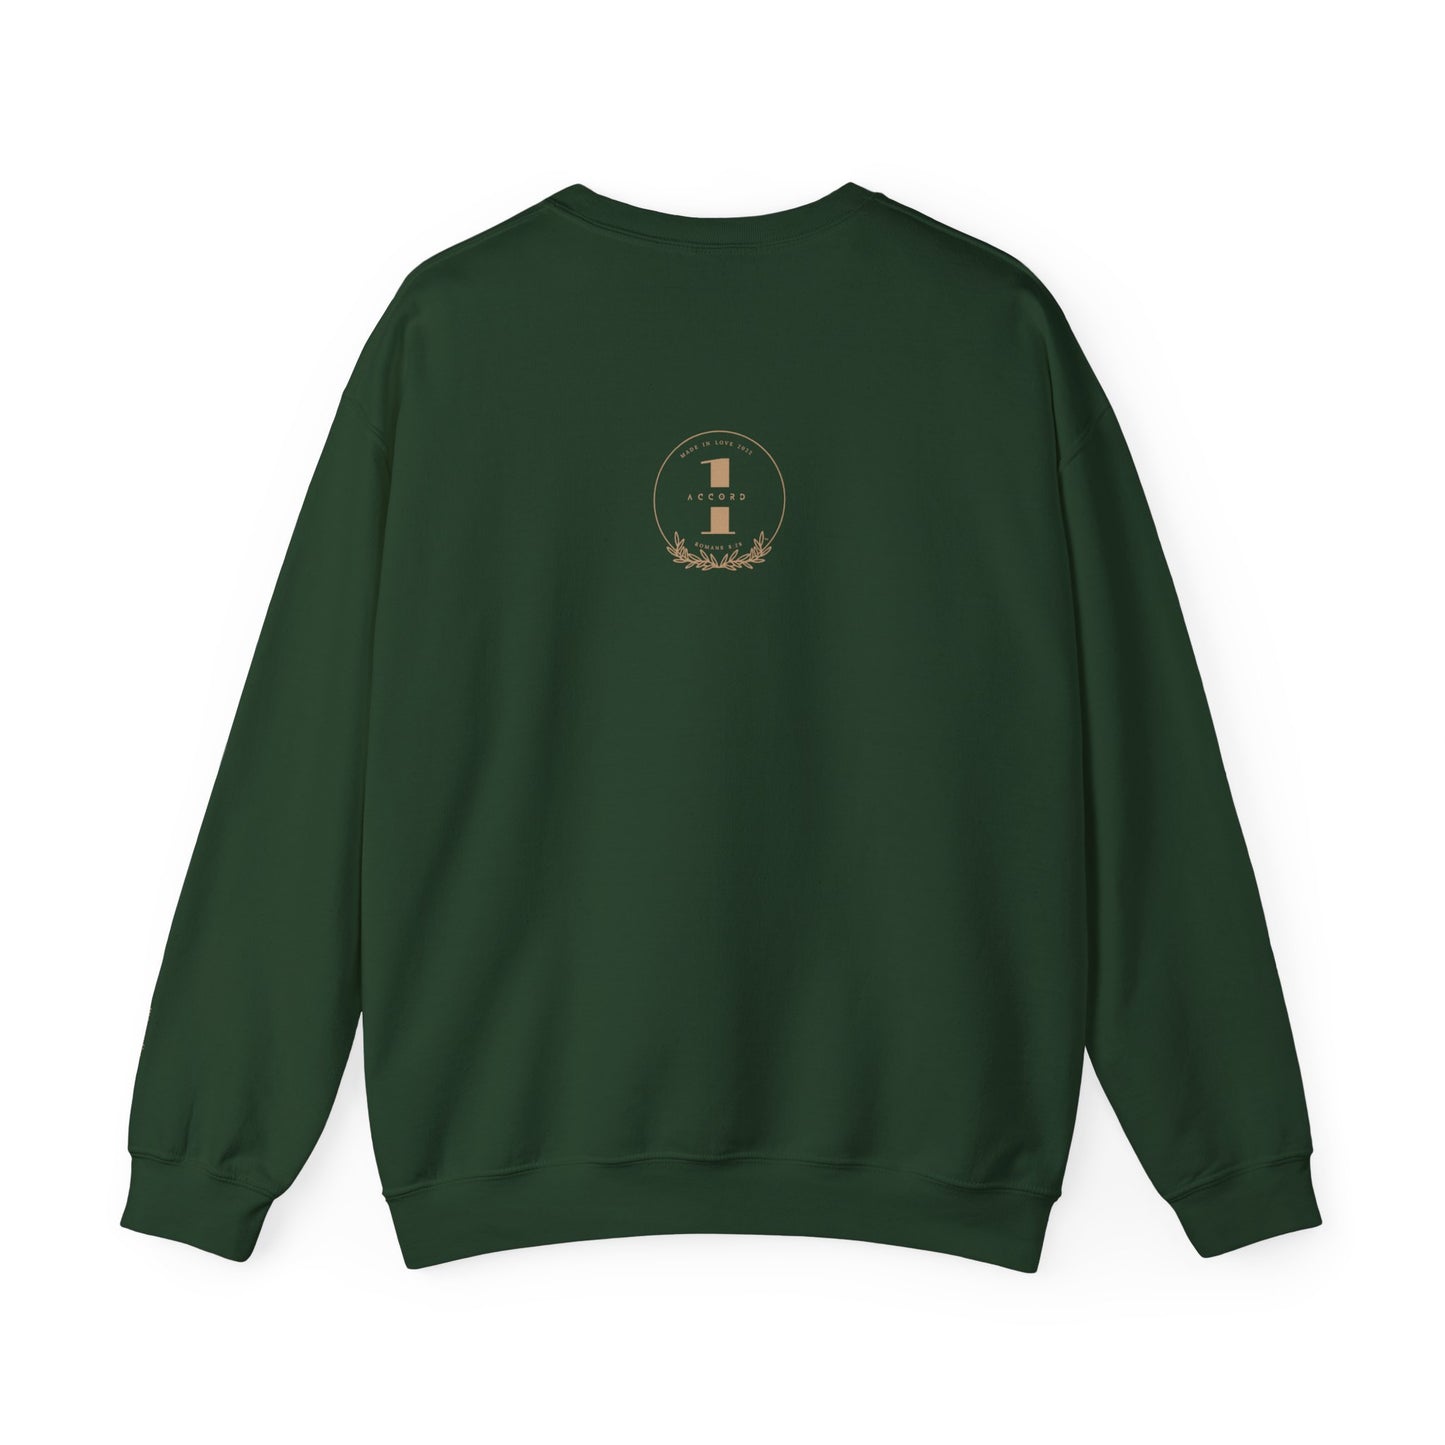 Fearfully and Wonderfully Made Crewneck (Male)